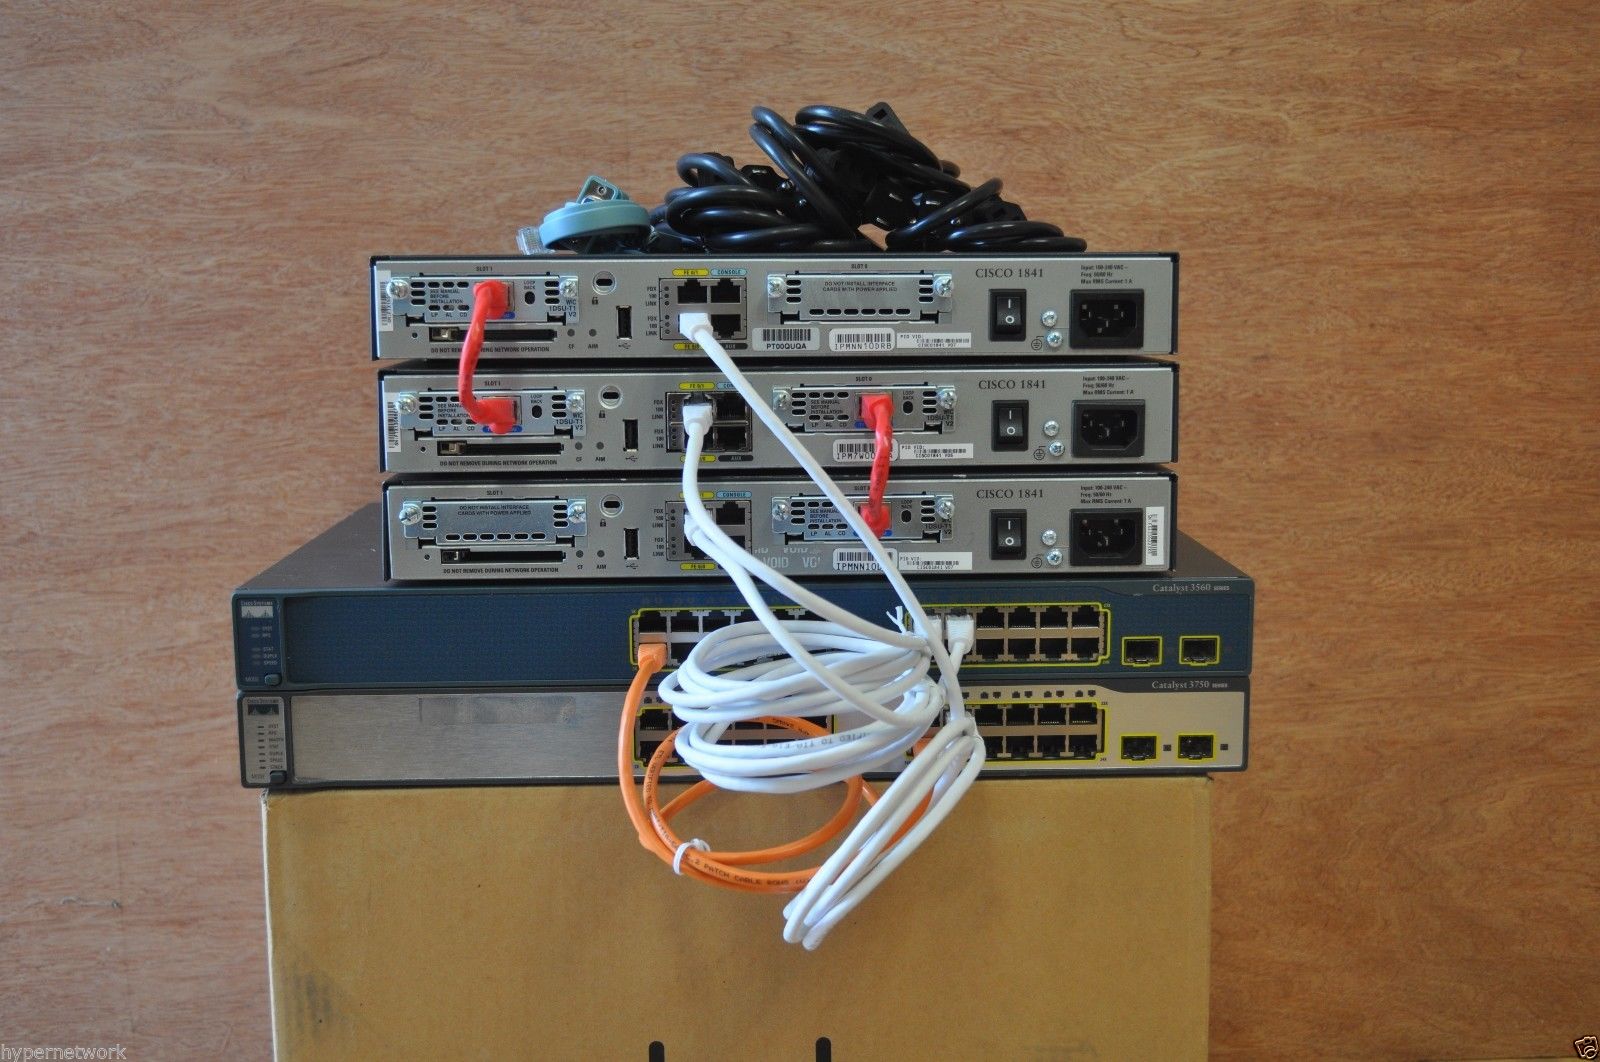 Real Basic CCNA CCENT CCNP home lab kit  3x Cisco 1841 with Modules & Ca 